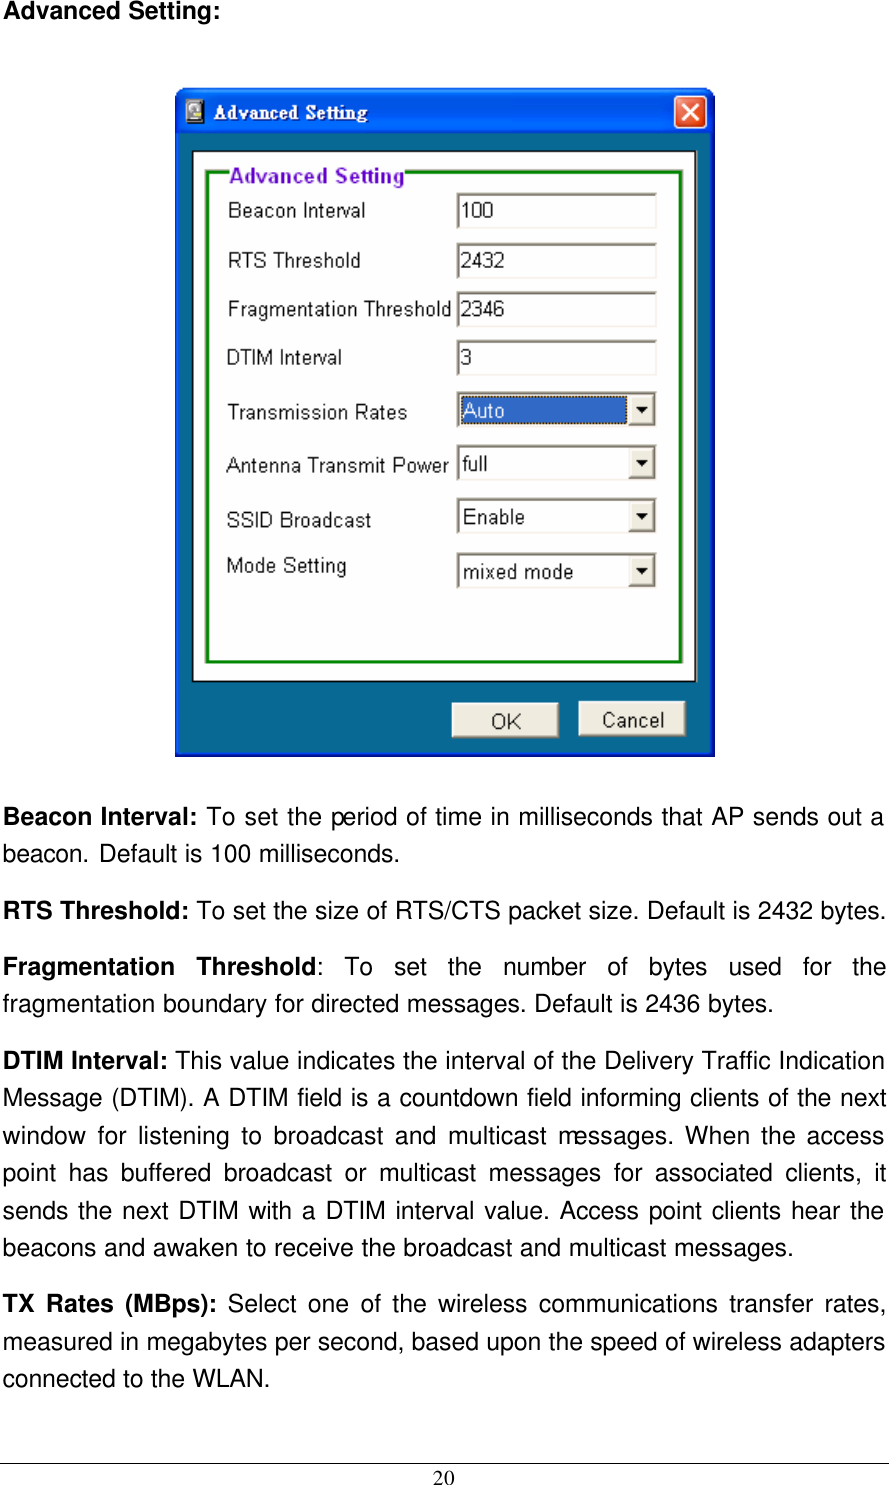  20 Advanced Setting:    Beacon Interval: To set the period of time in milliseconds that AP sends out a beacon. Default is 100 milliseconds. RTS Threshold: To set the size of RTS/CTS packet size. Default is 2432 bytes. Fragmentation Threshold: To set the number of bytes used for the fragmentation boundary for directed messages. Default is 2436 bytes. DTIM Interval: This value indicates the interval of the Delivery Traffic Indication Message (DTIM). A DTIM field is a countdown field informing clients of the next window for listening to broadcast and multicast messages. When the access point has buffered broadcast or multicast messages for associated clients, it sends the next DTIM with a DTIM interval value. Access point clients hear the beacons and awaken to receive the broadcast and multicast messages. TX Rates (MBps): Select one of the wireless communications transfer rates, measured in megabytes per second, based upon the speed of wireless adapters connected to the WLAN. 